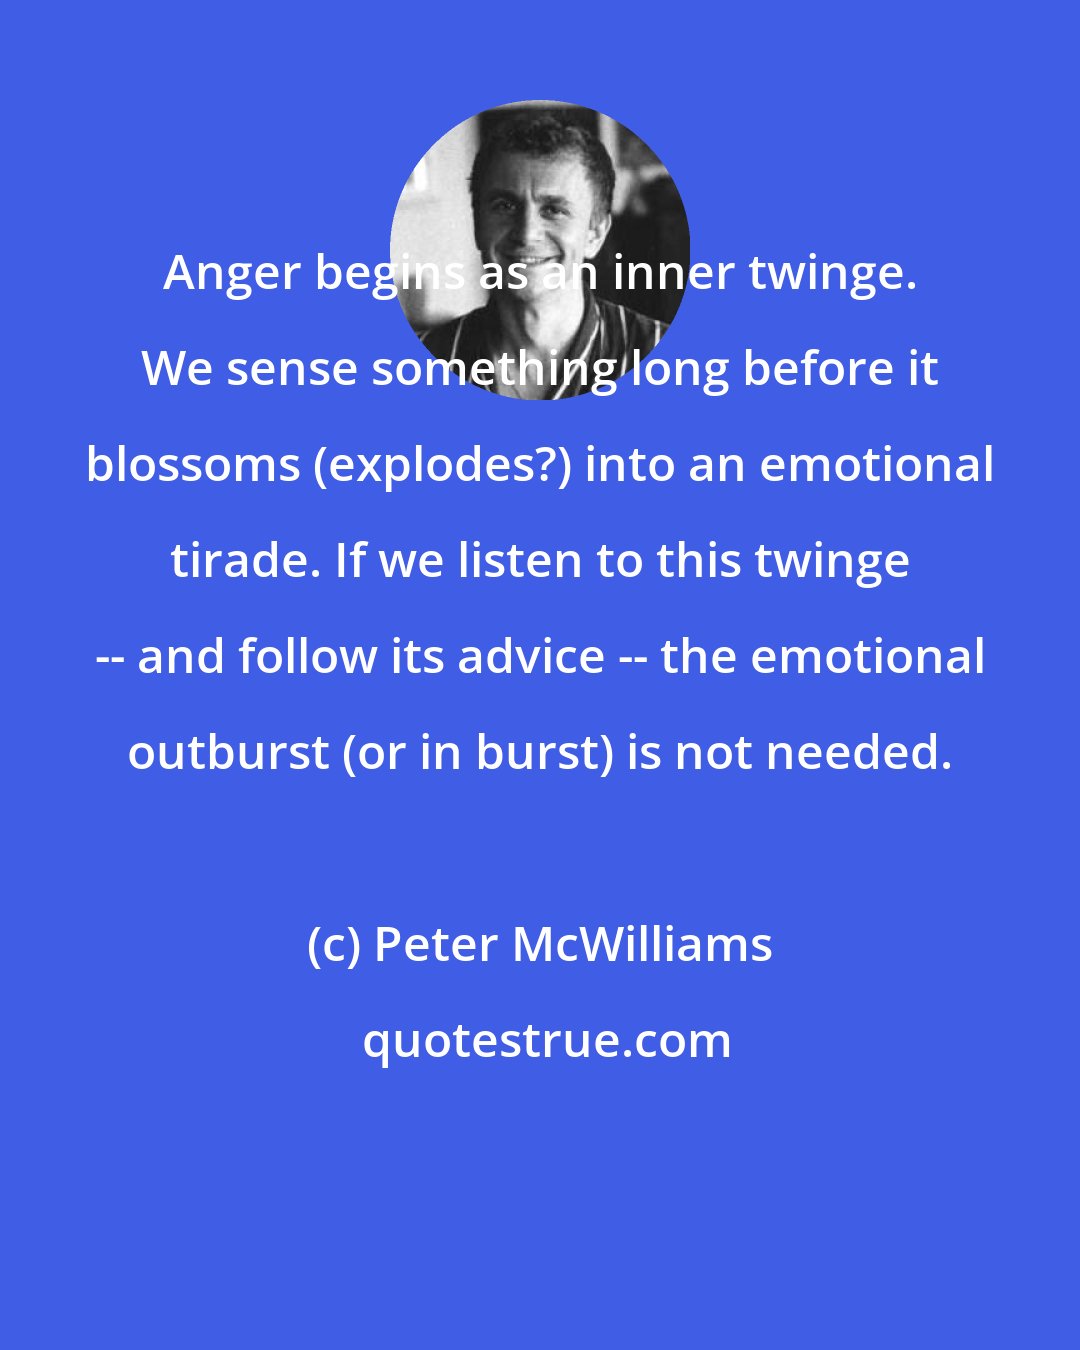 Peter McWilliams: Anger begins as an inner twinge. We sense something long before it blossoms (explodes?) into an emotional tirade. If we listen to this twinge -- and follow its advice -- the emotional outburst (or in burst) is not needed.